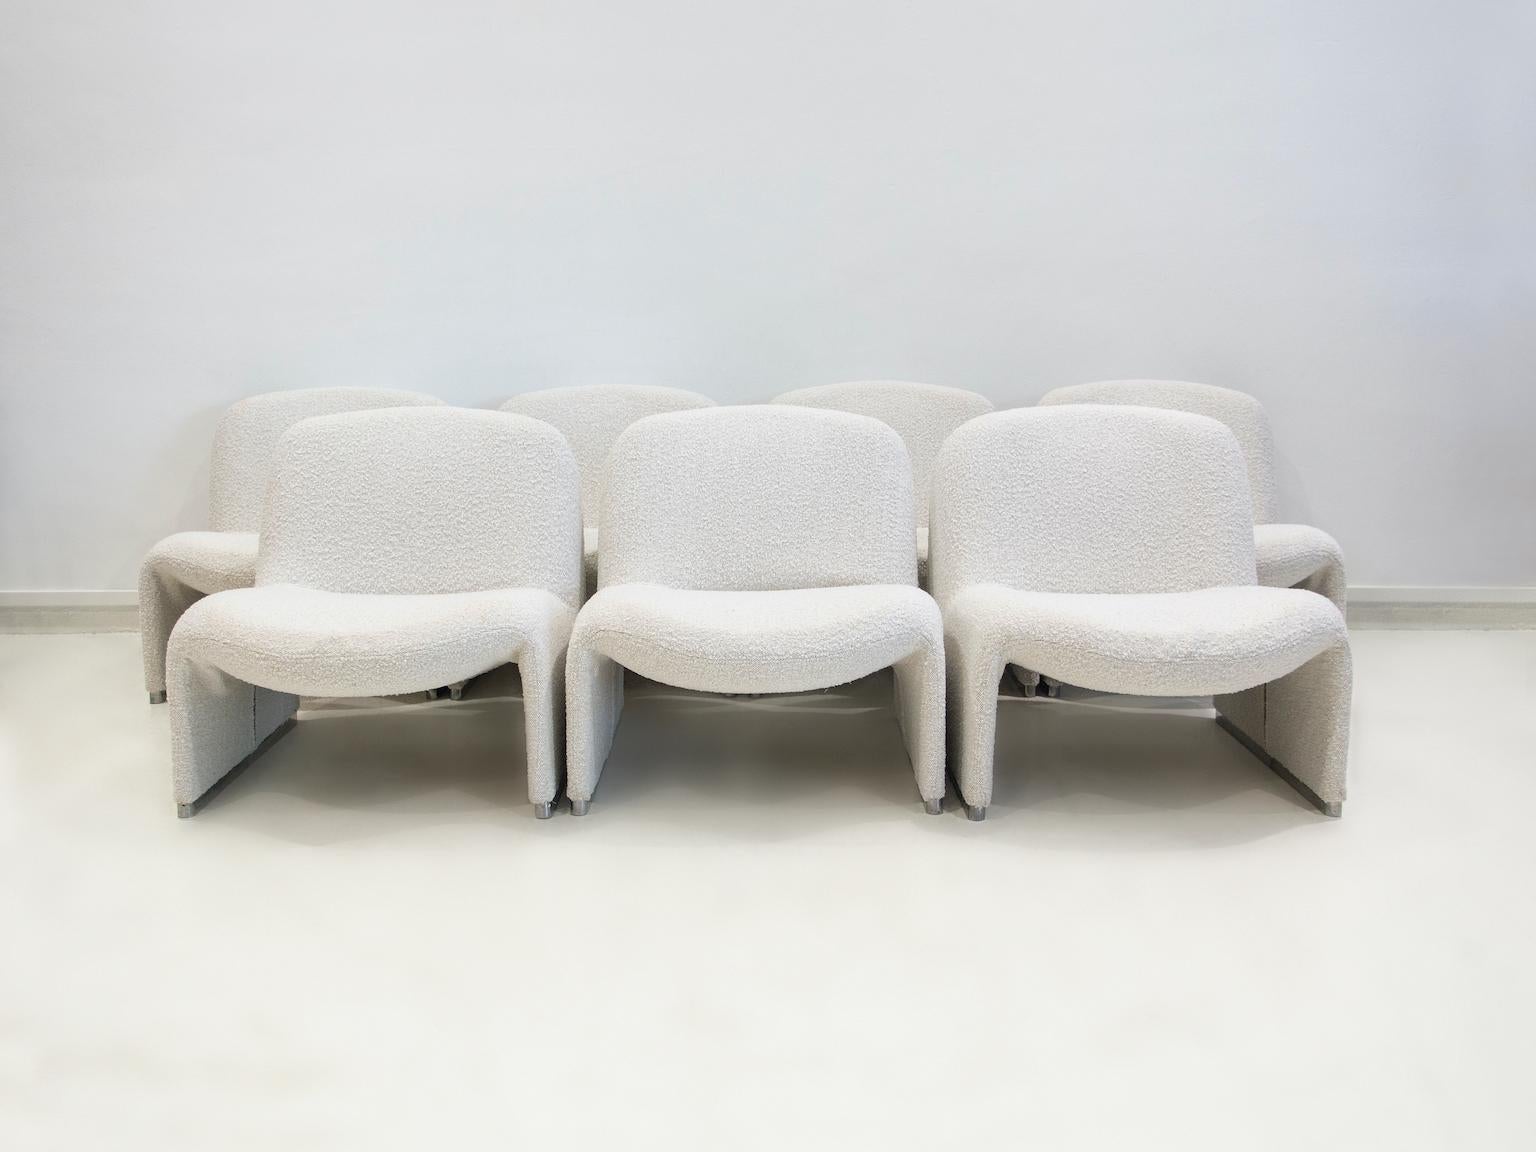 Five Alky easy chairs on aluminum runner legs, reupholstered with white bouclé fabric. Alky was designed by Giancarlo Piretti in 1969. Manufactured and marked by Anonima Castelli. Versatile and comfortable chairs with smooth lines. Please note that